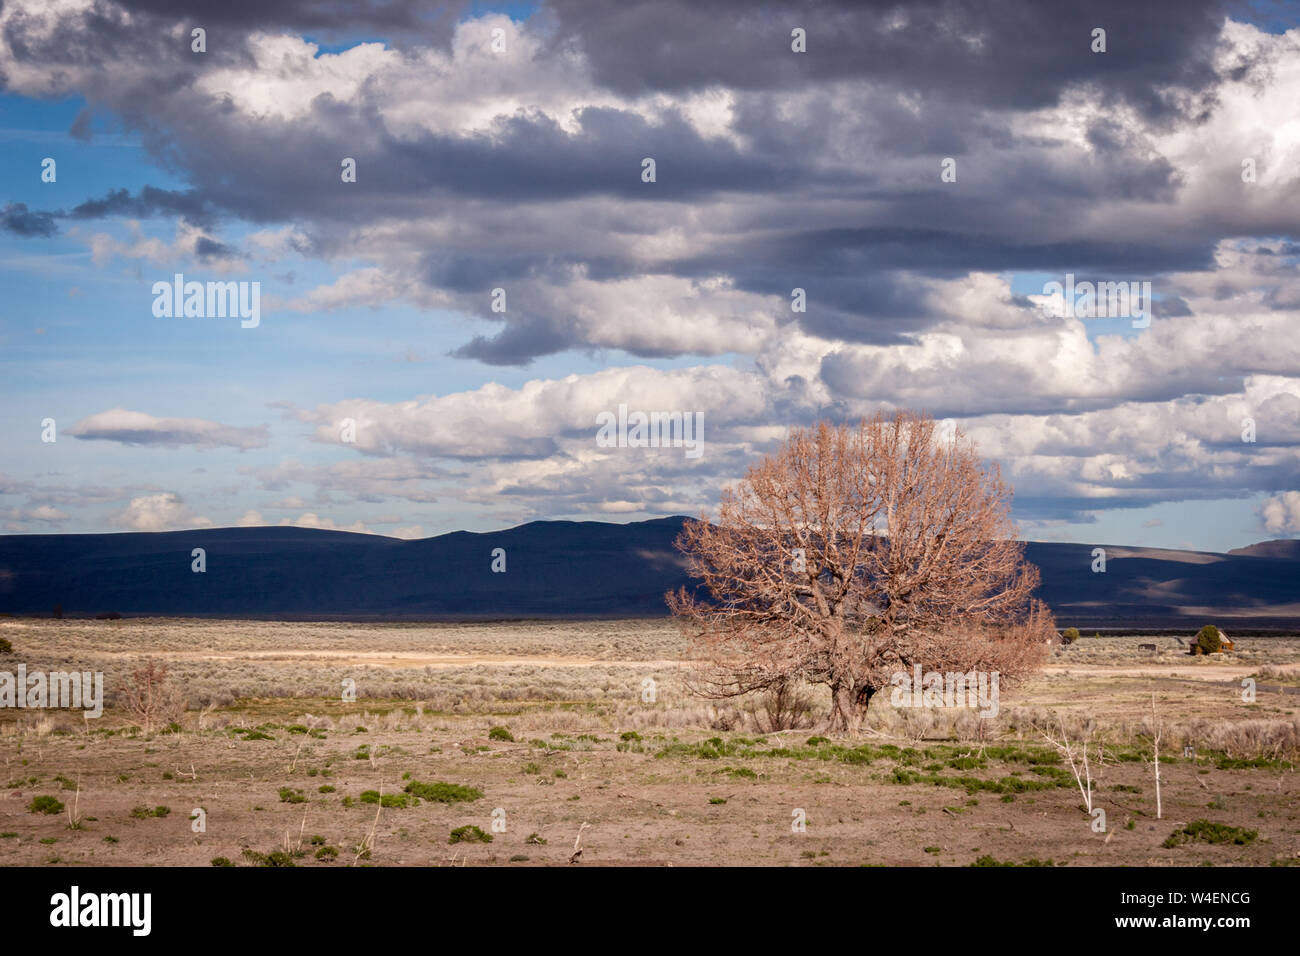 A landscape from the Great Basin in central Oregon in spring. Stock Photo